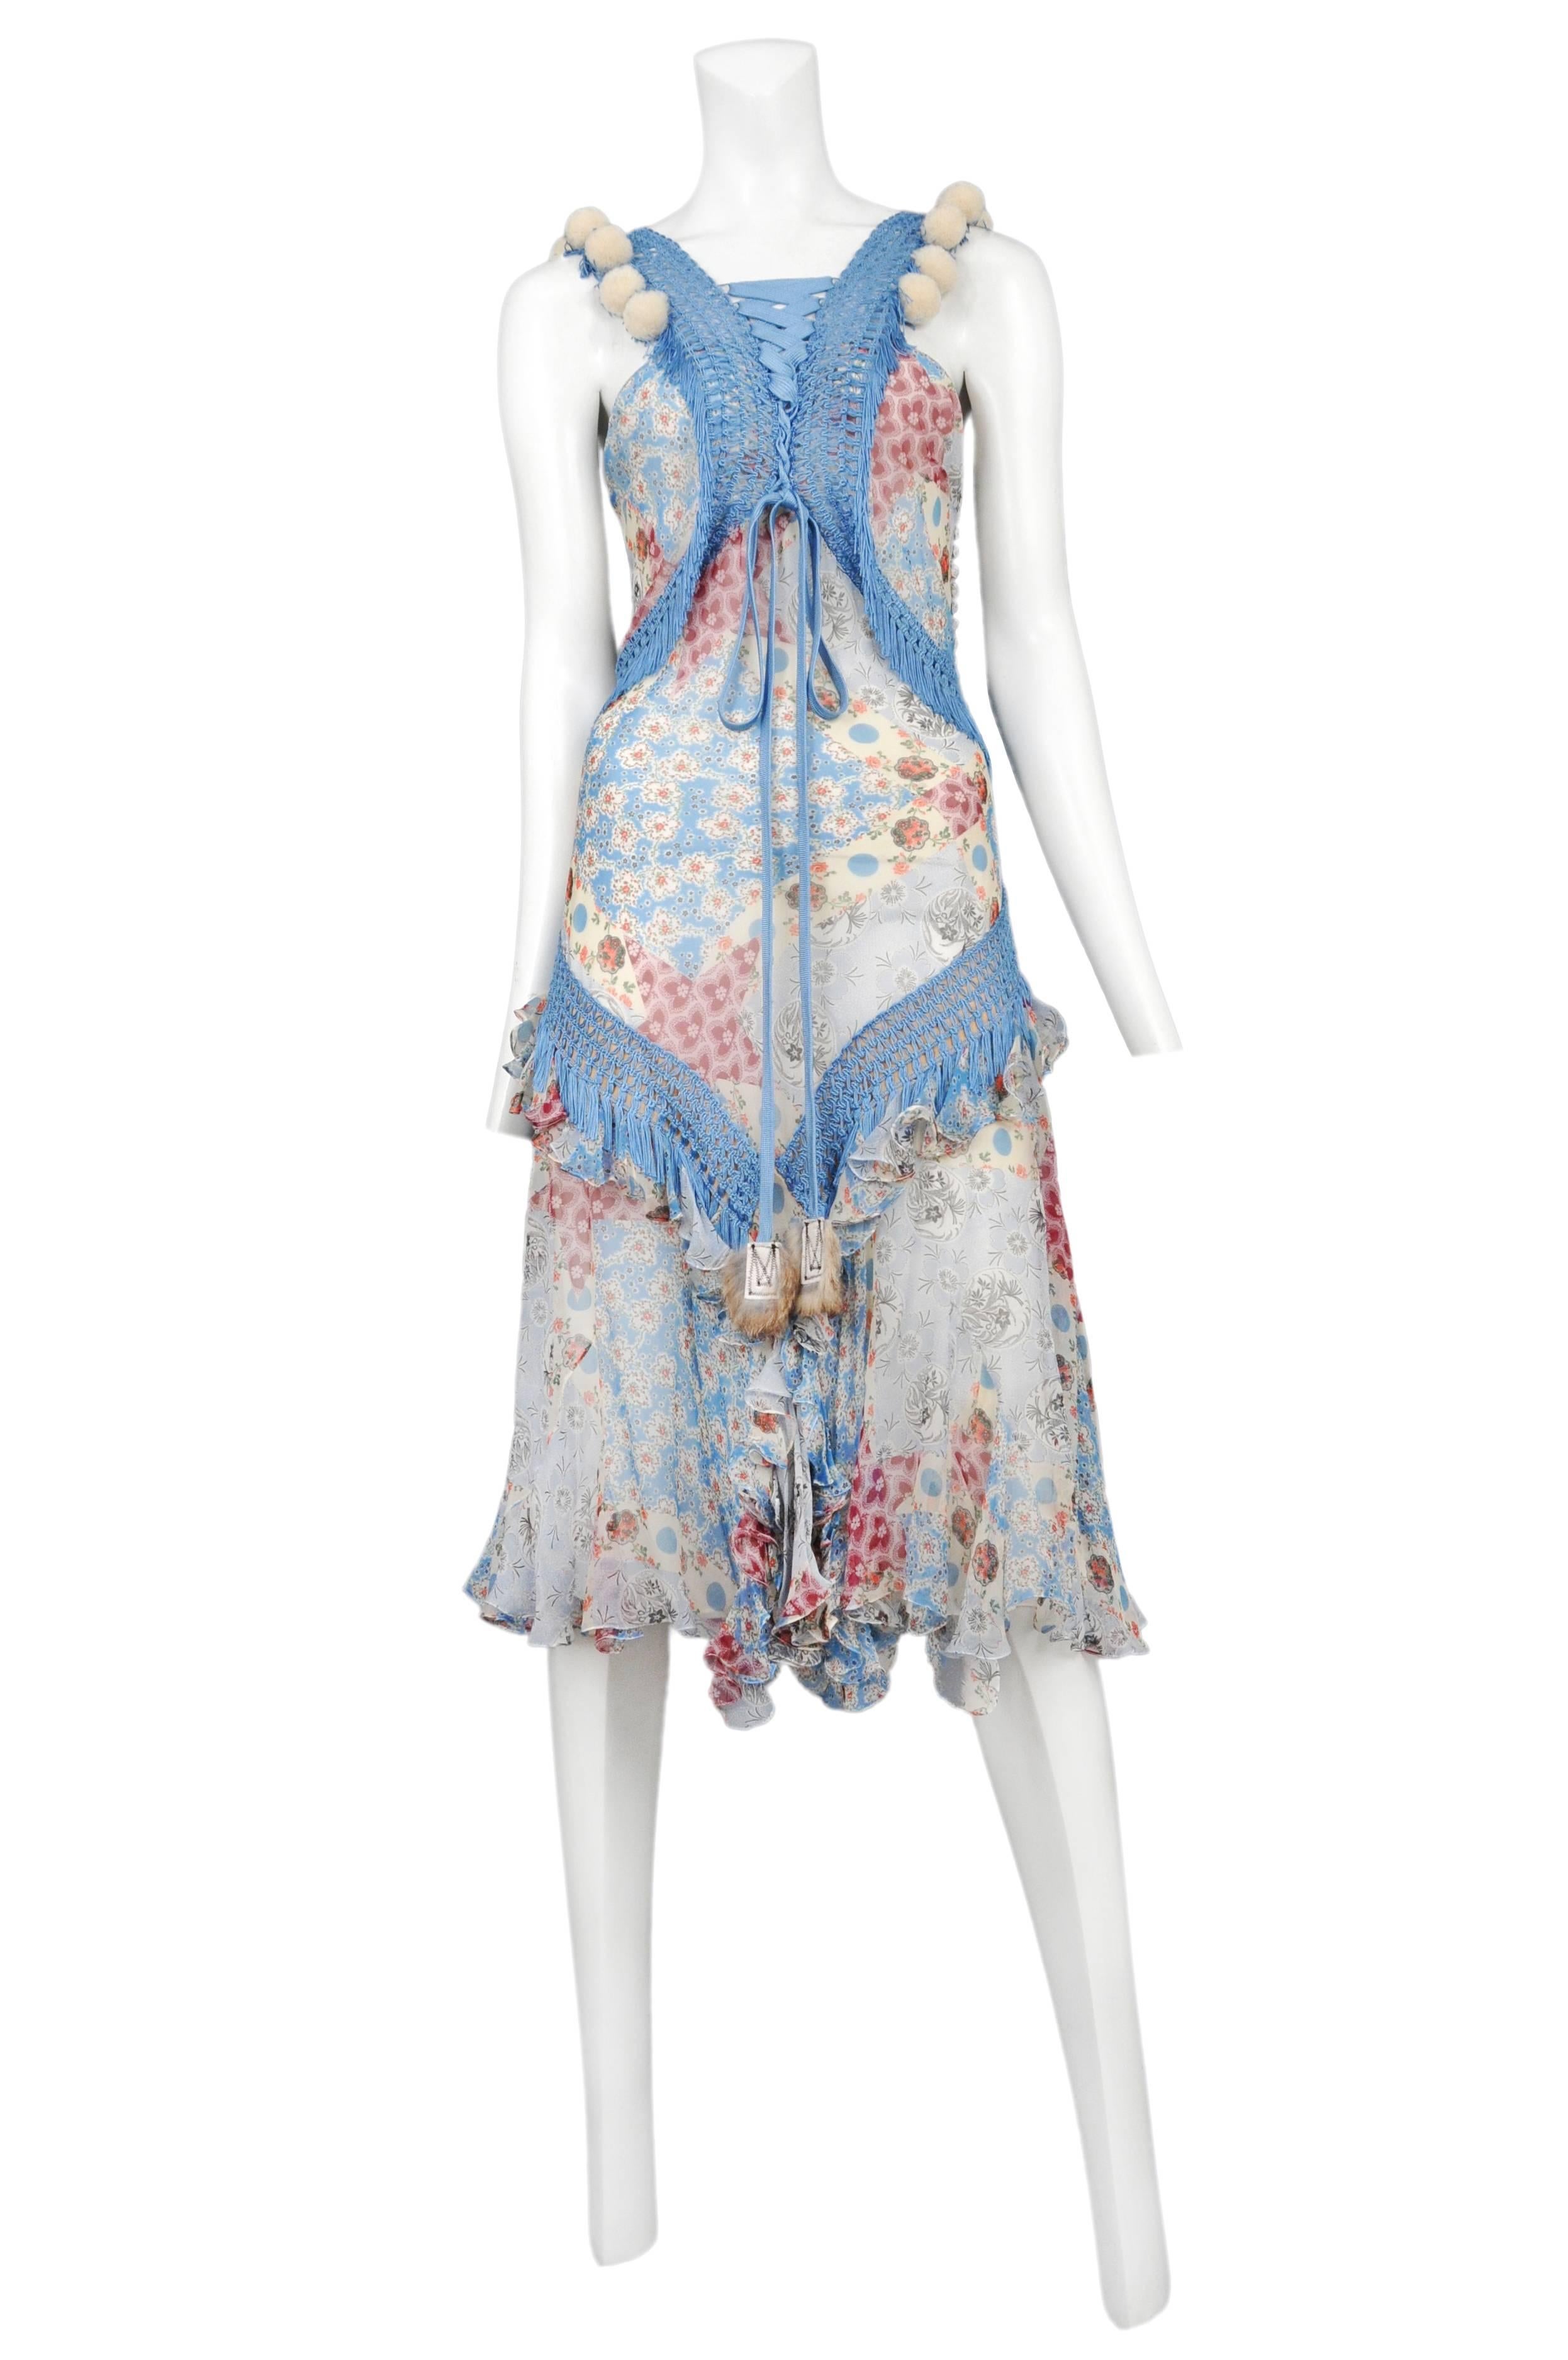 Vintage John Galliano for Dior floral printed dress featuring blue crochet detailing at the bust and hips, white pom poms adorning the shoulder straps and fur tassels at the ends of the front lace up ties. Runway piece Circa 2002.
Please inquire